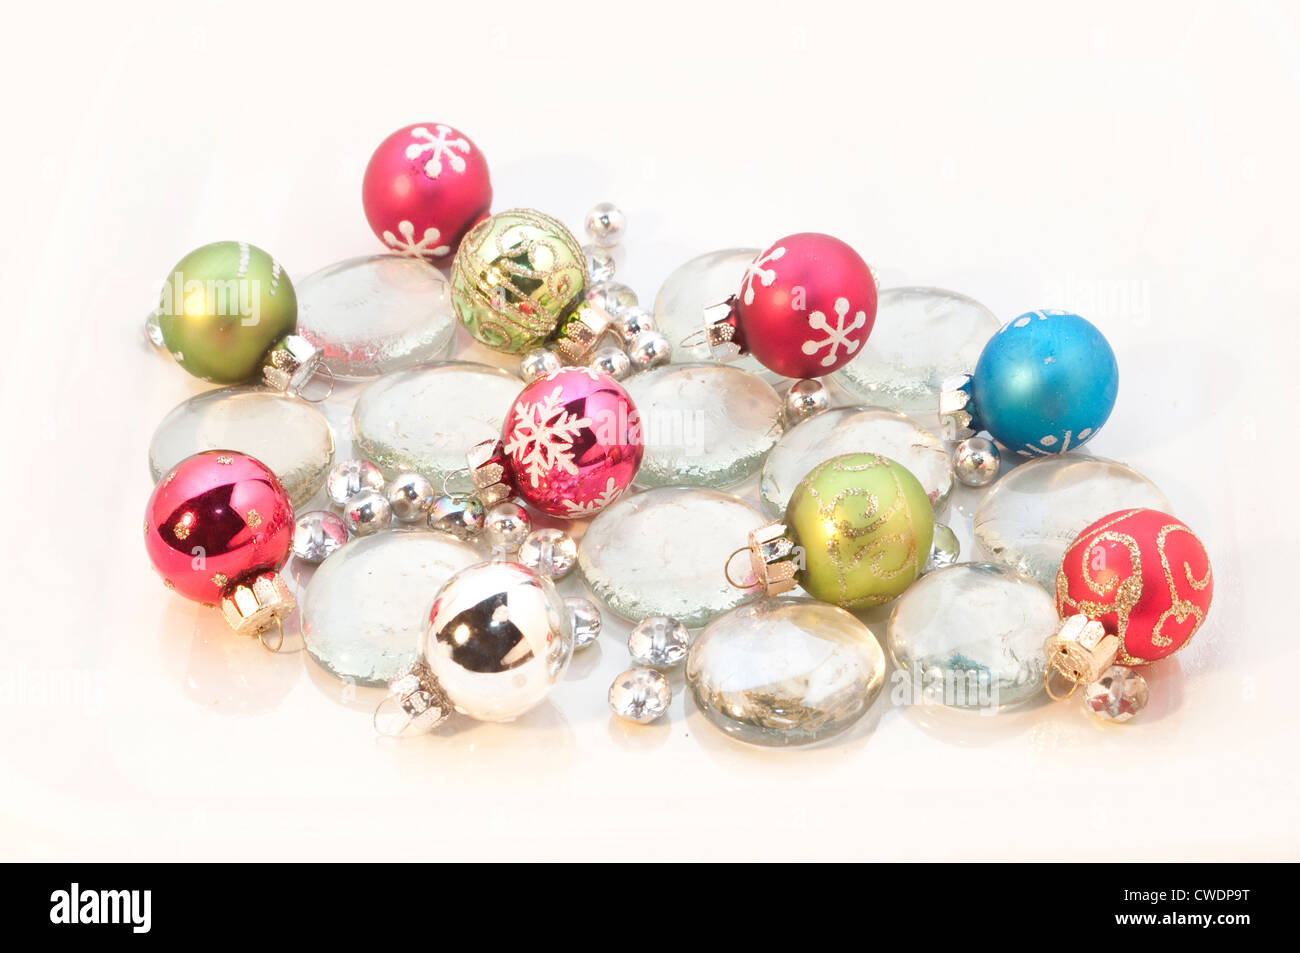 Old-fashioned Christmas decorations sparkle atop an icy background. Stock Photo